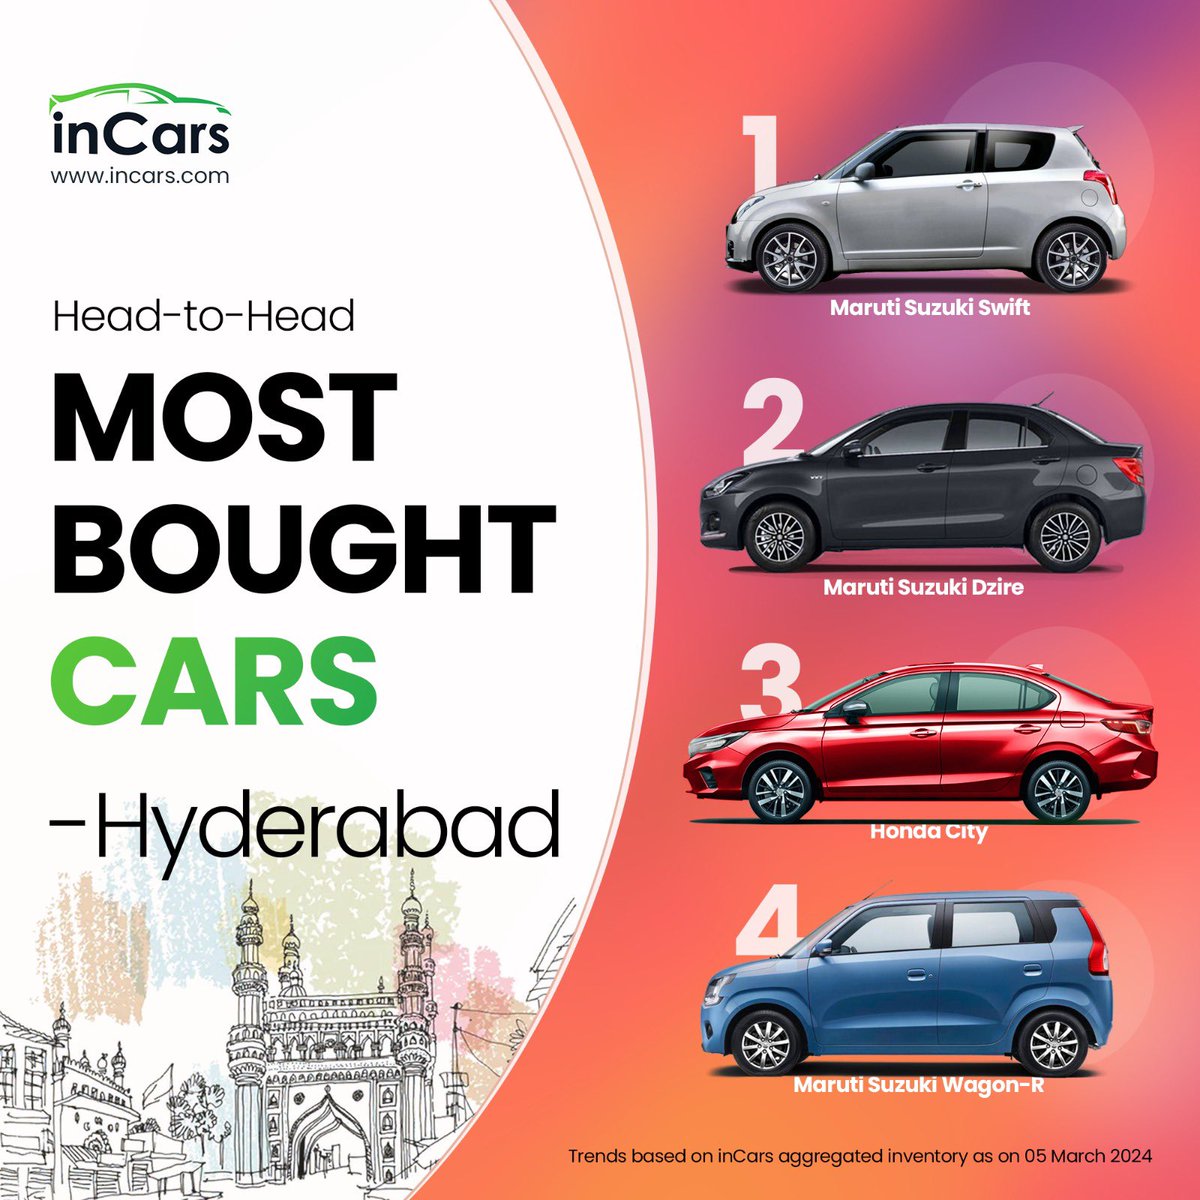 Today “Daily Wheels” reveals Hyderabad's Hottest Rides! 🚗🎉 Gear up as we unveil the most bought used cars in this city 🌆 Stay tuned for more insights! #inCars #inCarsAI #UsedCars #UsedCarSearch #UsedCarsMarket #SecondHandCars #DailyWheels #Hyderabad #UsedCarsInHyderabad